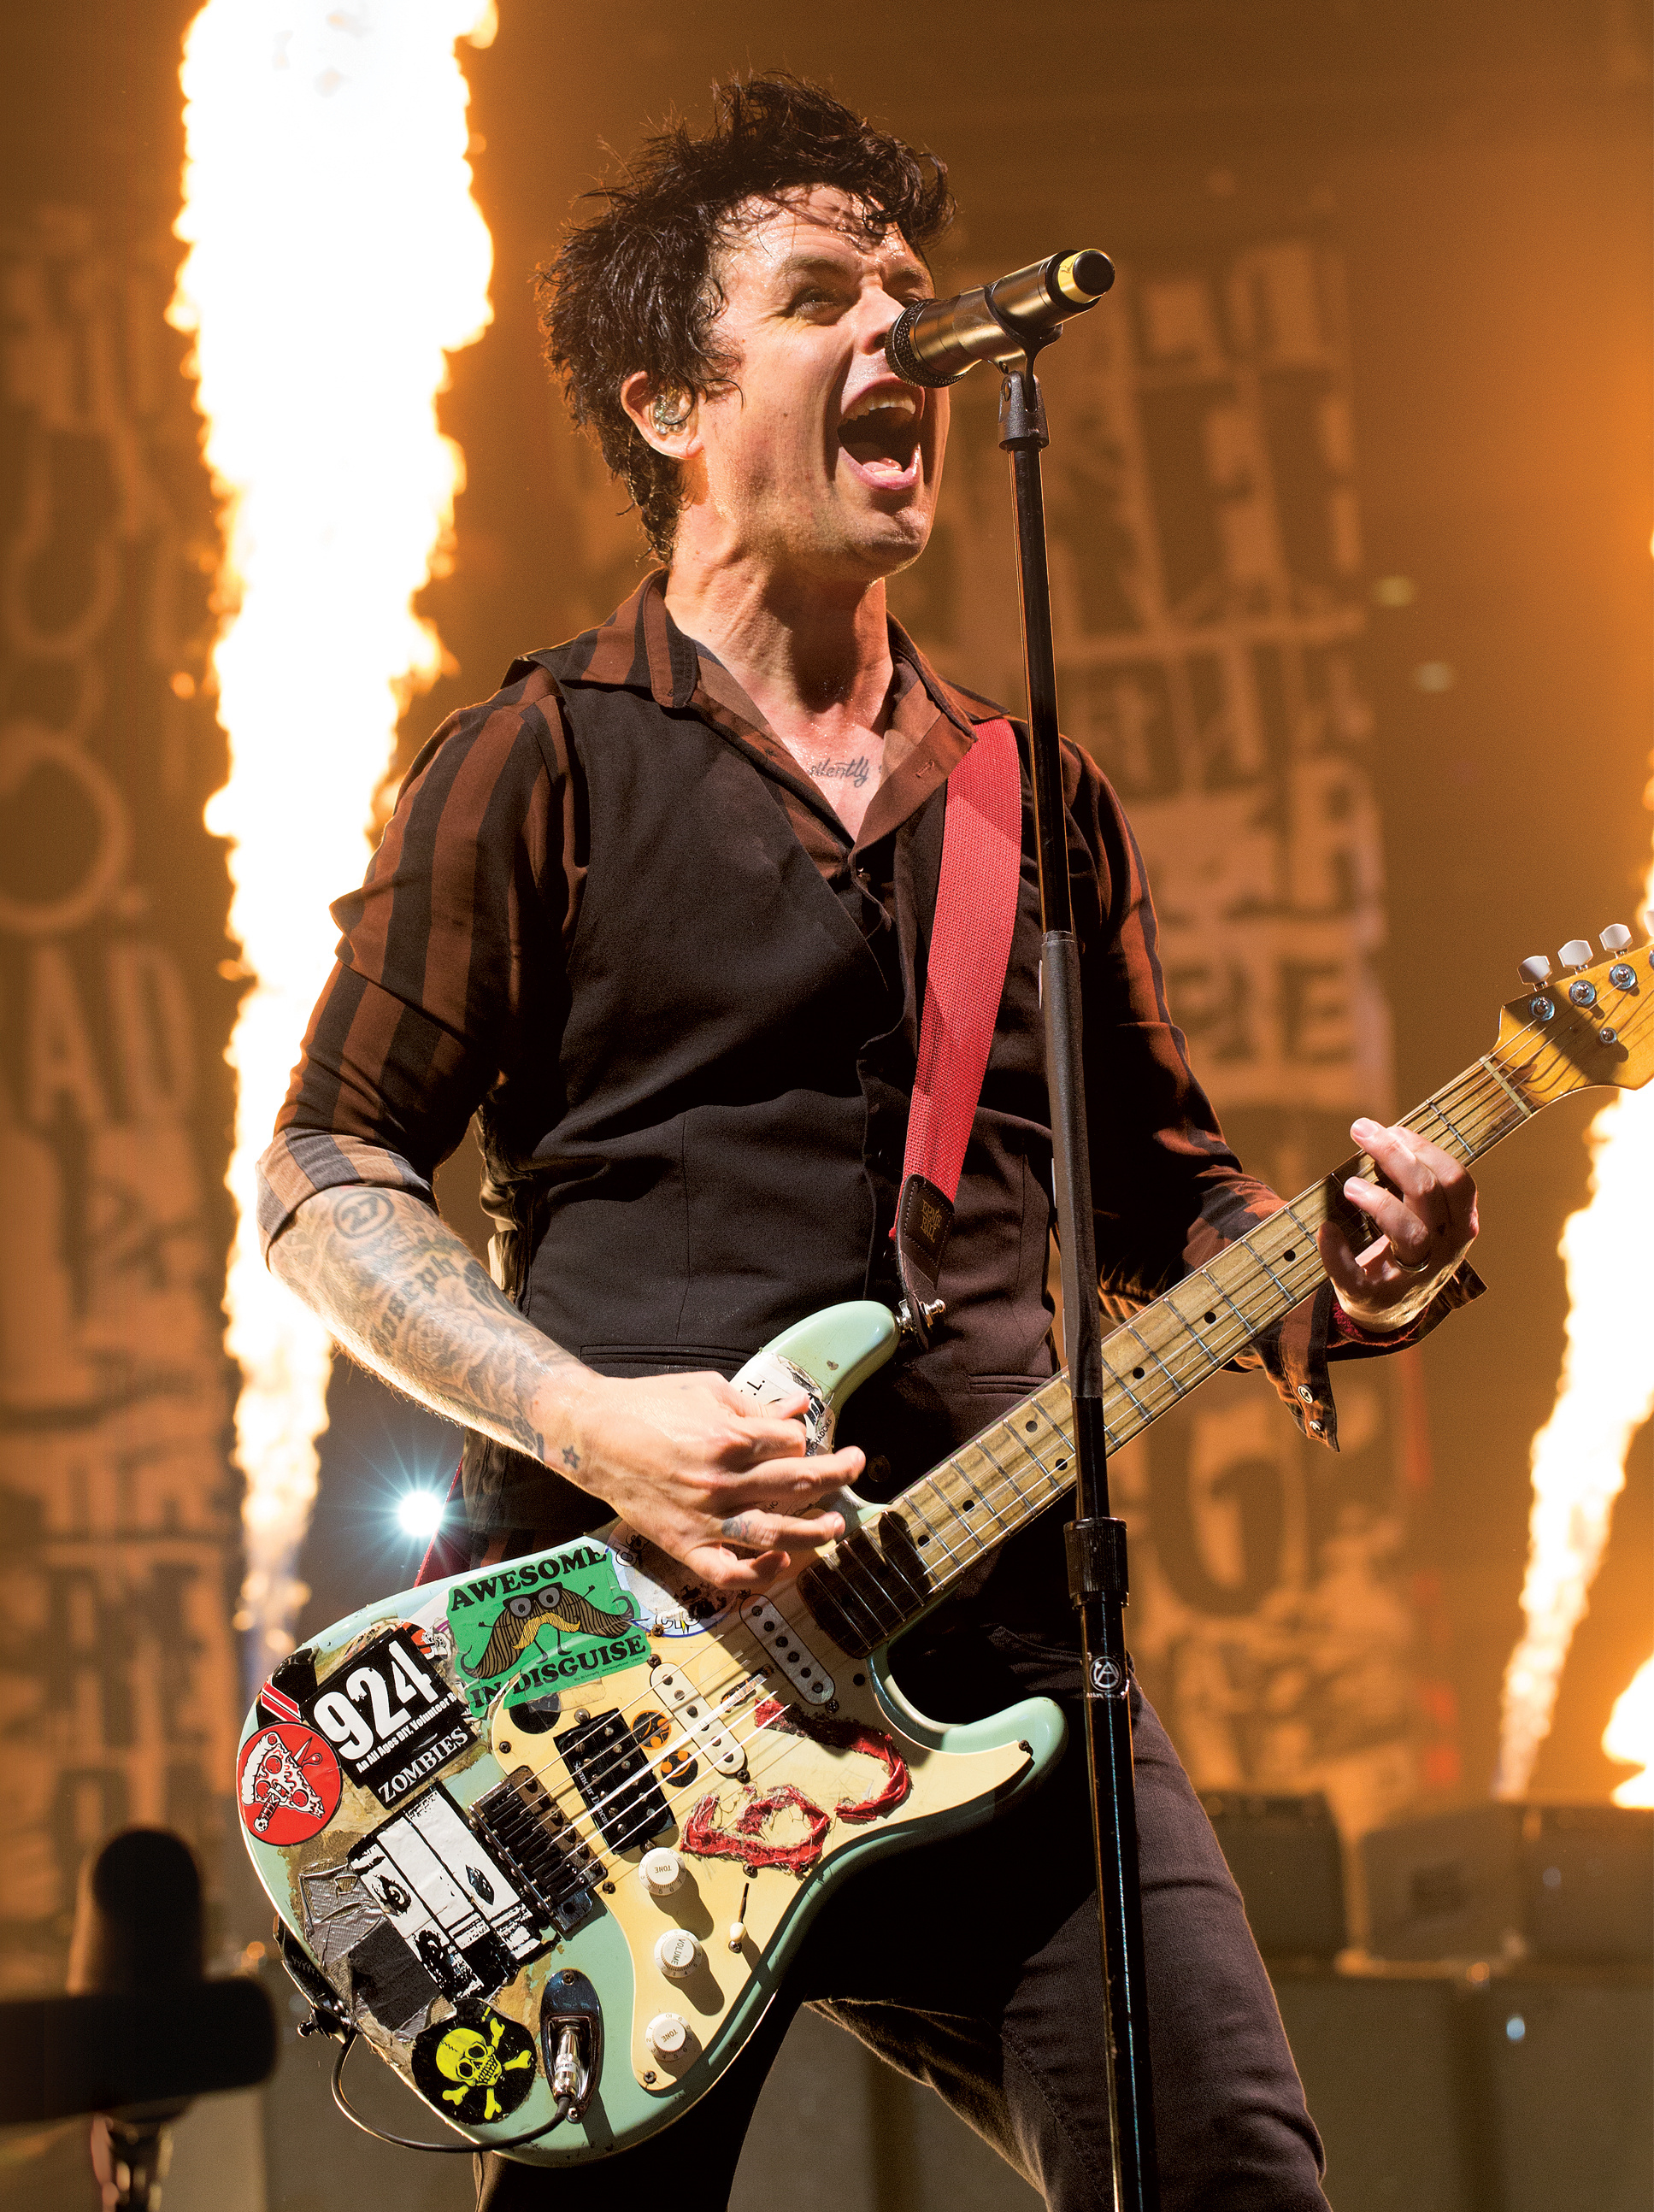 Green Day (Band): "Welcome to Paradise" peaked at number 56 on the US Billboard Hot 100 Airplay chart. 1940x2590 HD Wallpaper.